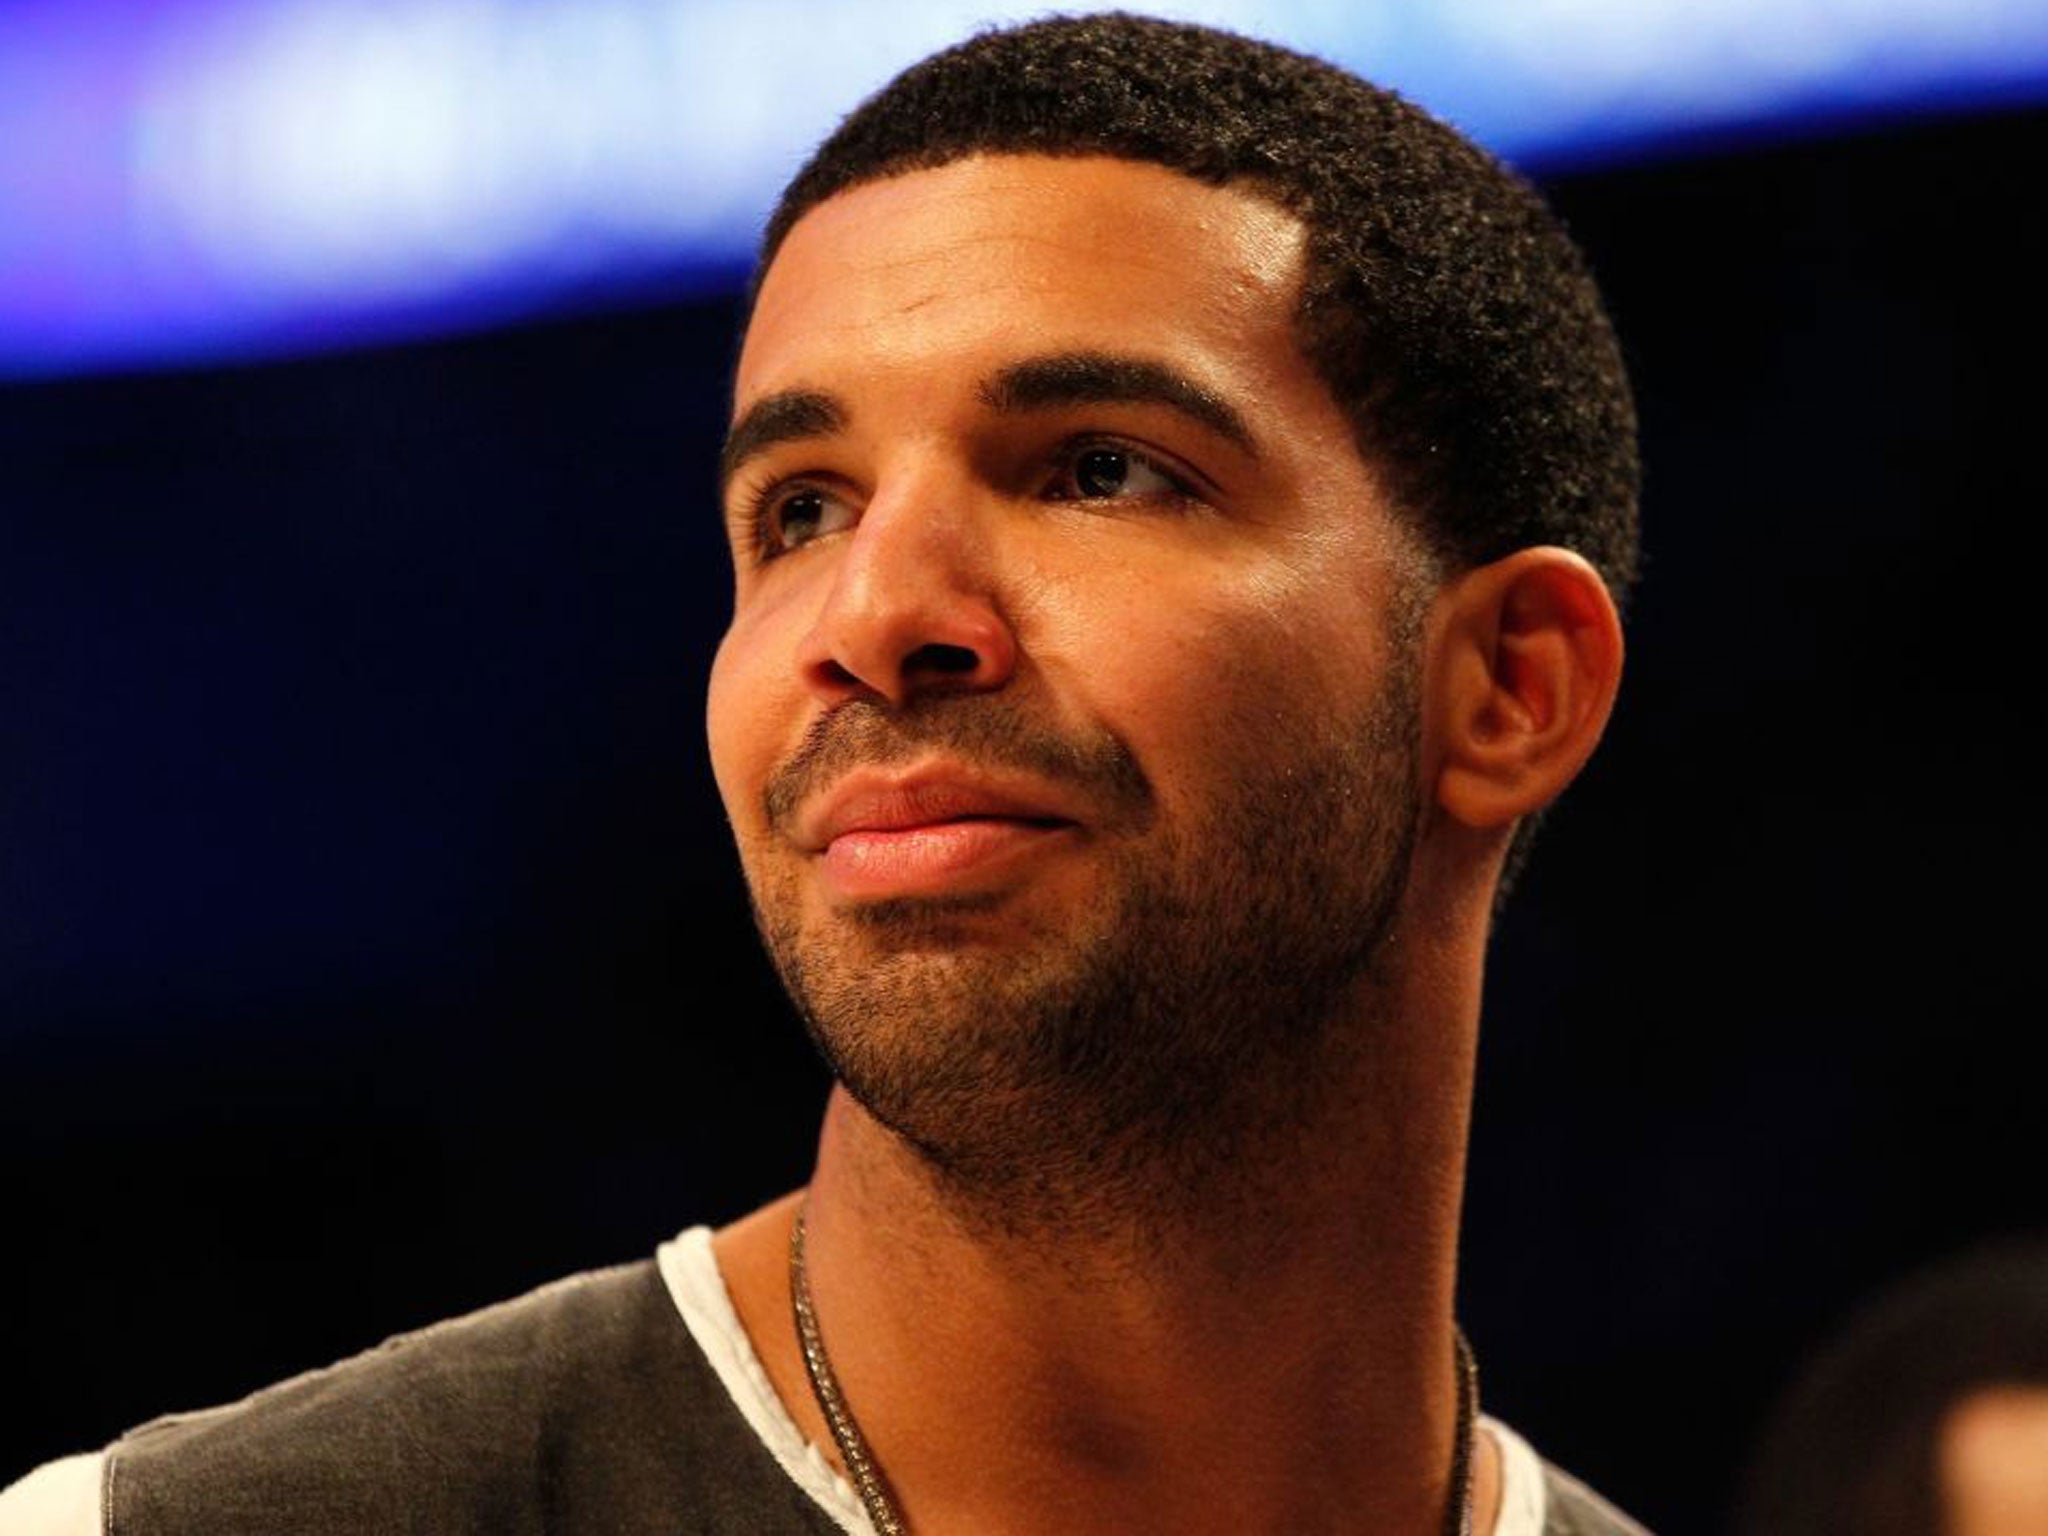 Drake now has 14 singles in the top 100 chart